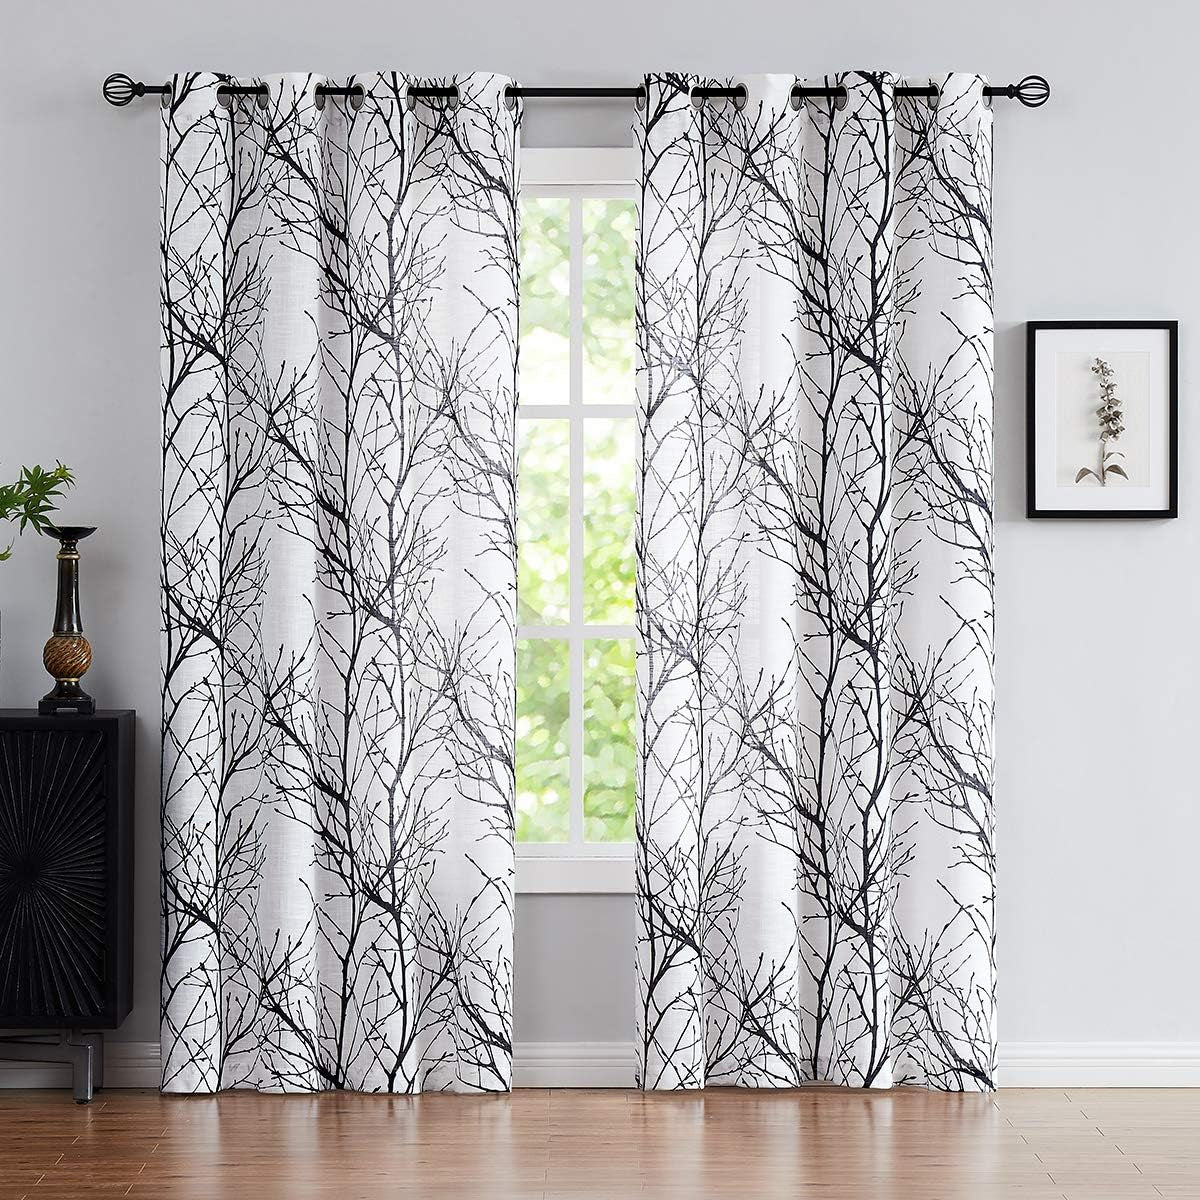 FMFUNCTEX Blue White Curtains for Kitchen Living Room 72“ Grey Tree Branches Print Curtain Set for Small Windows Linen Textured Semi-Sheer Drapes for Bedroom Grommet Top, 2 Panels  Fmfunctex Black 50" X 84" |2Pcs 